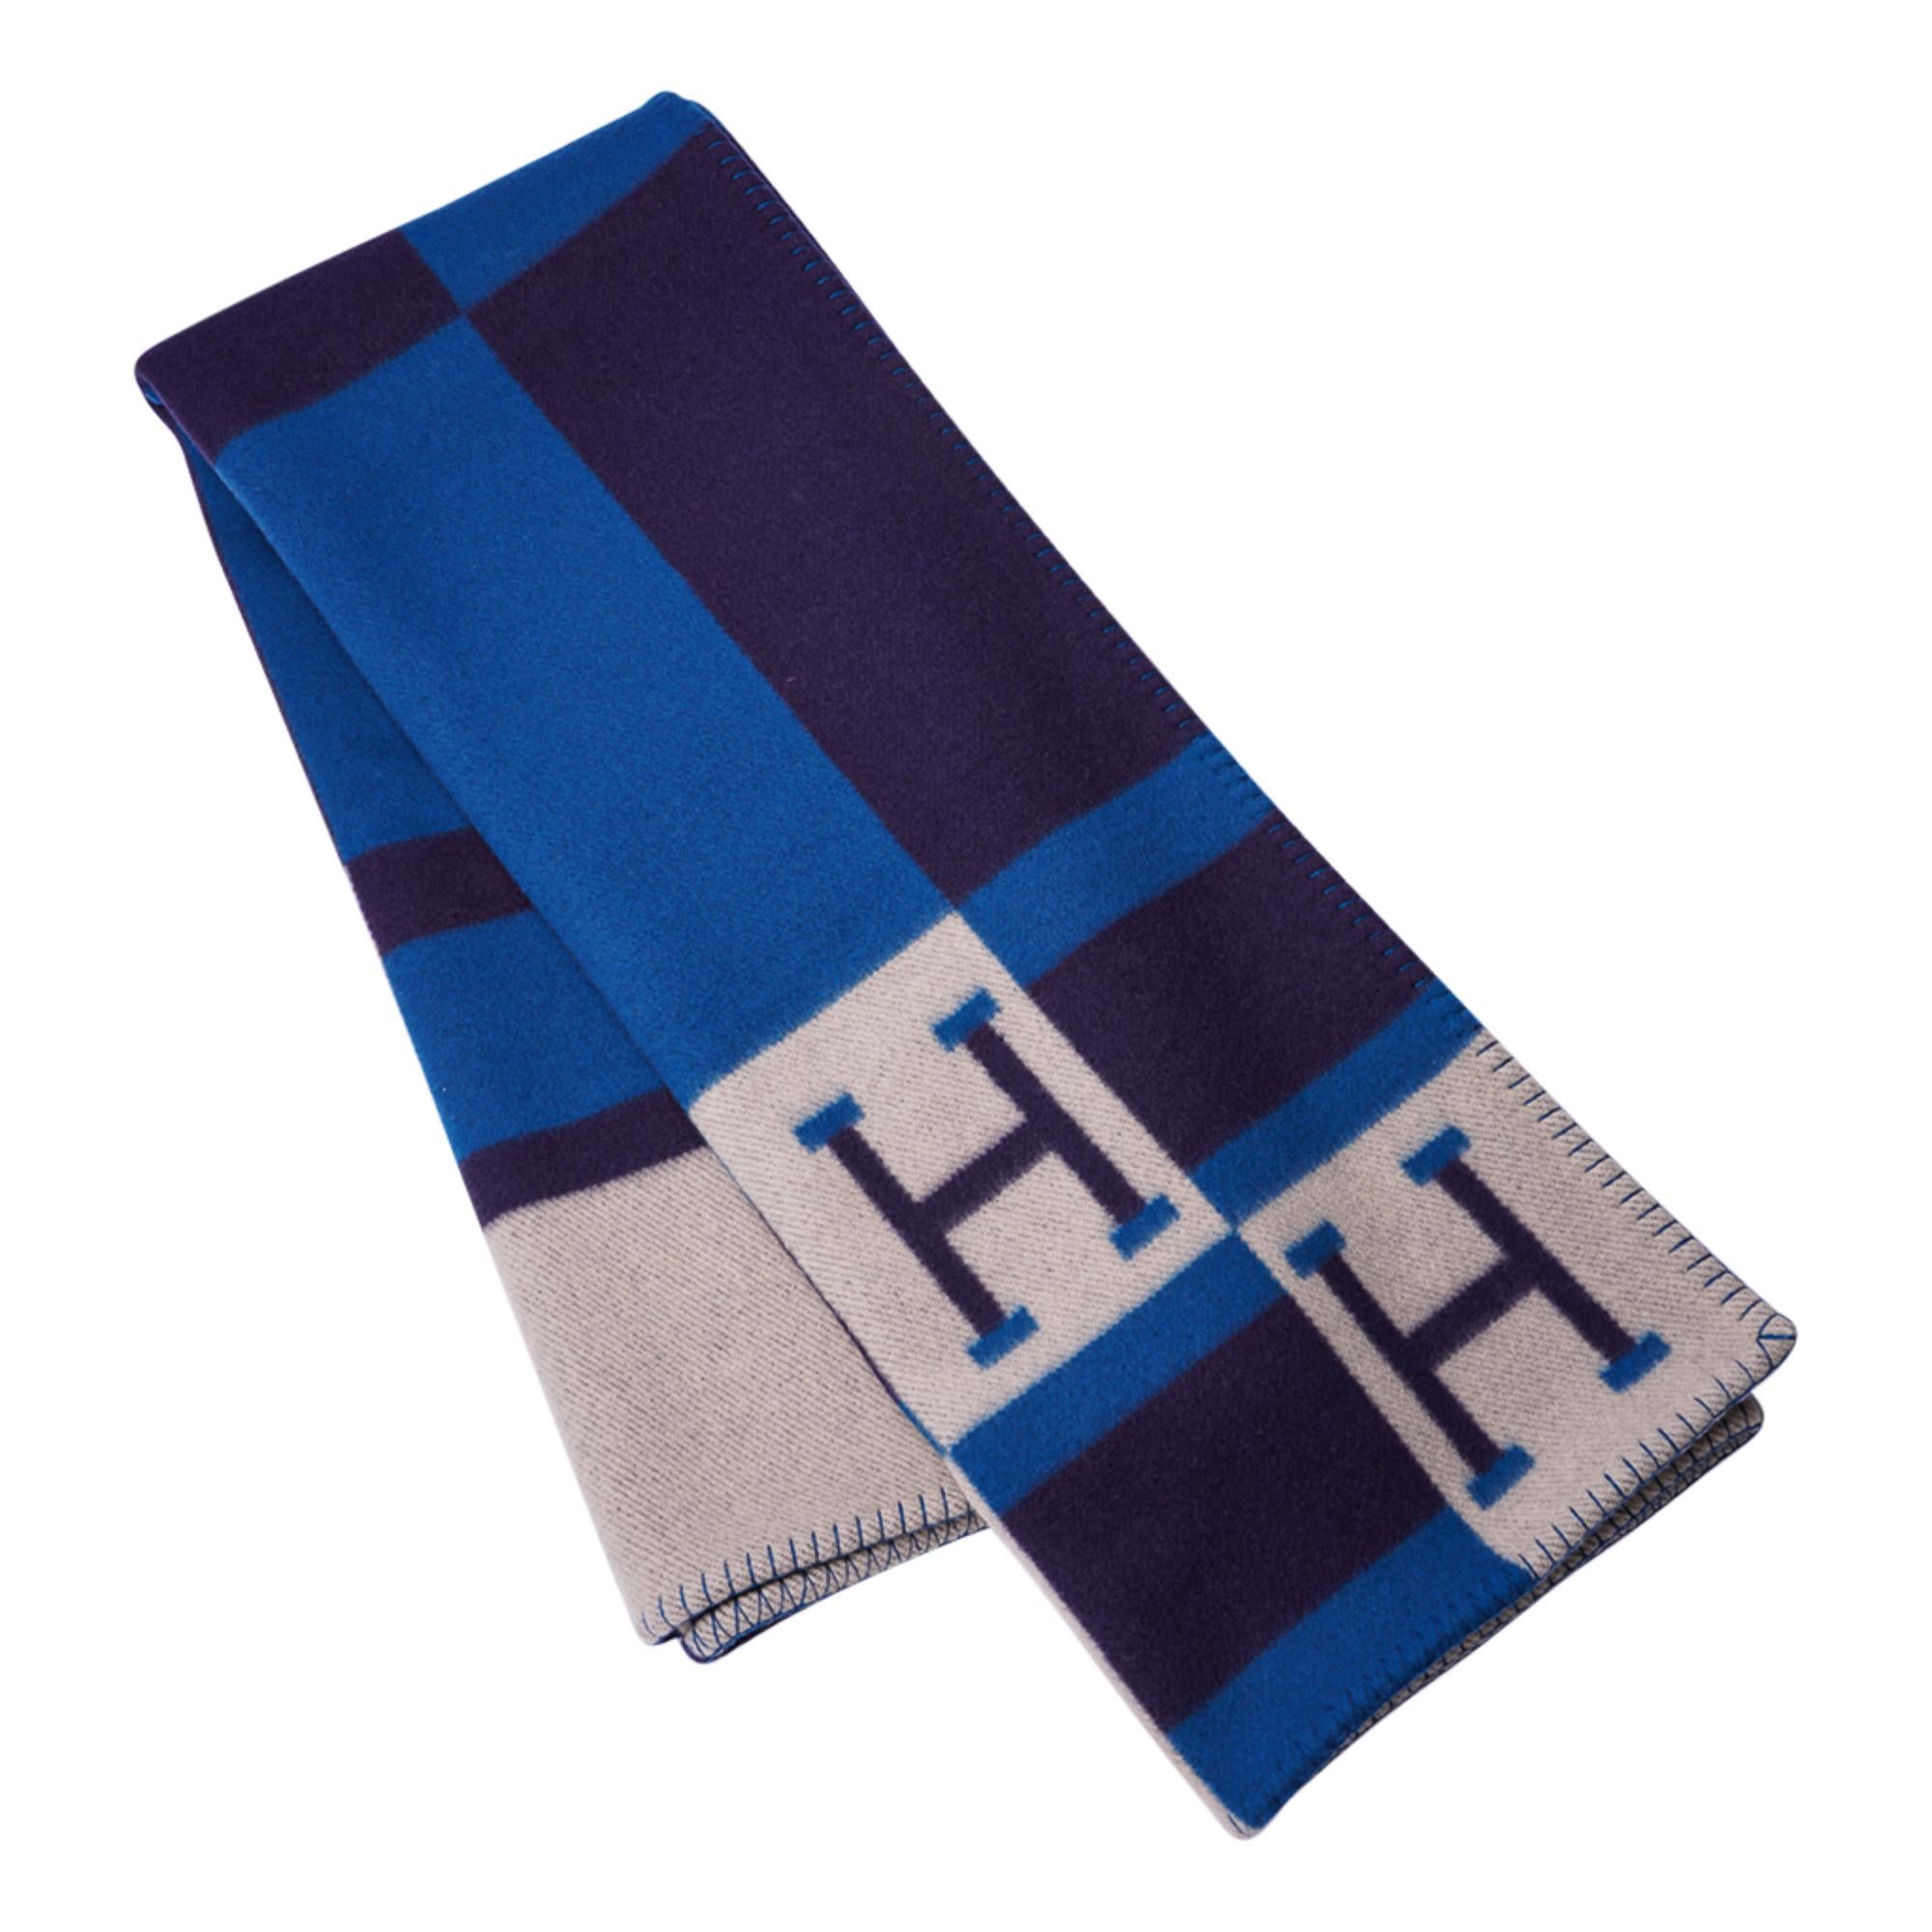 Mightychic offers an Hermes Avalon Bayadere blanket featured in Blue Marine.
Created from 90% Merino Wool and 10% cashmere and has whip stitch edges.
Fabulous with the peacock blue  and ecru to compliment any room!
New or Pristine Store Fresh